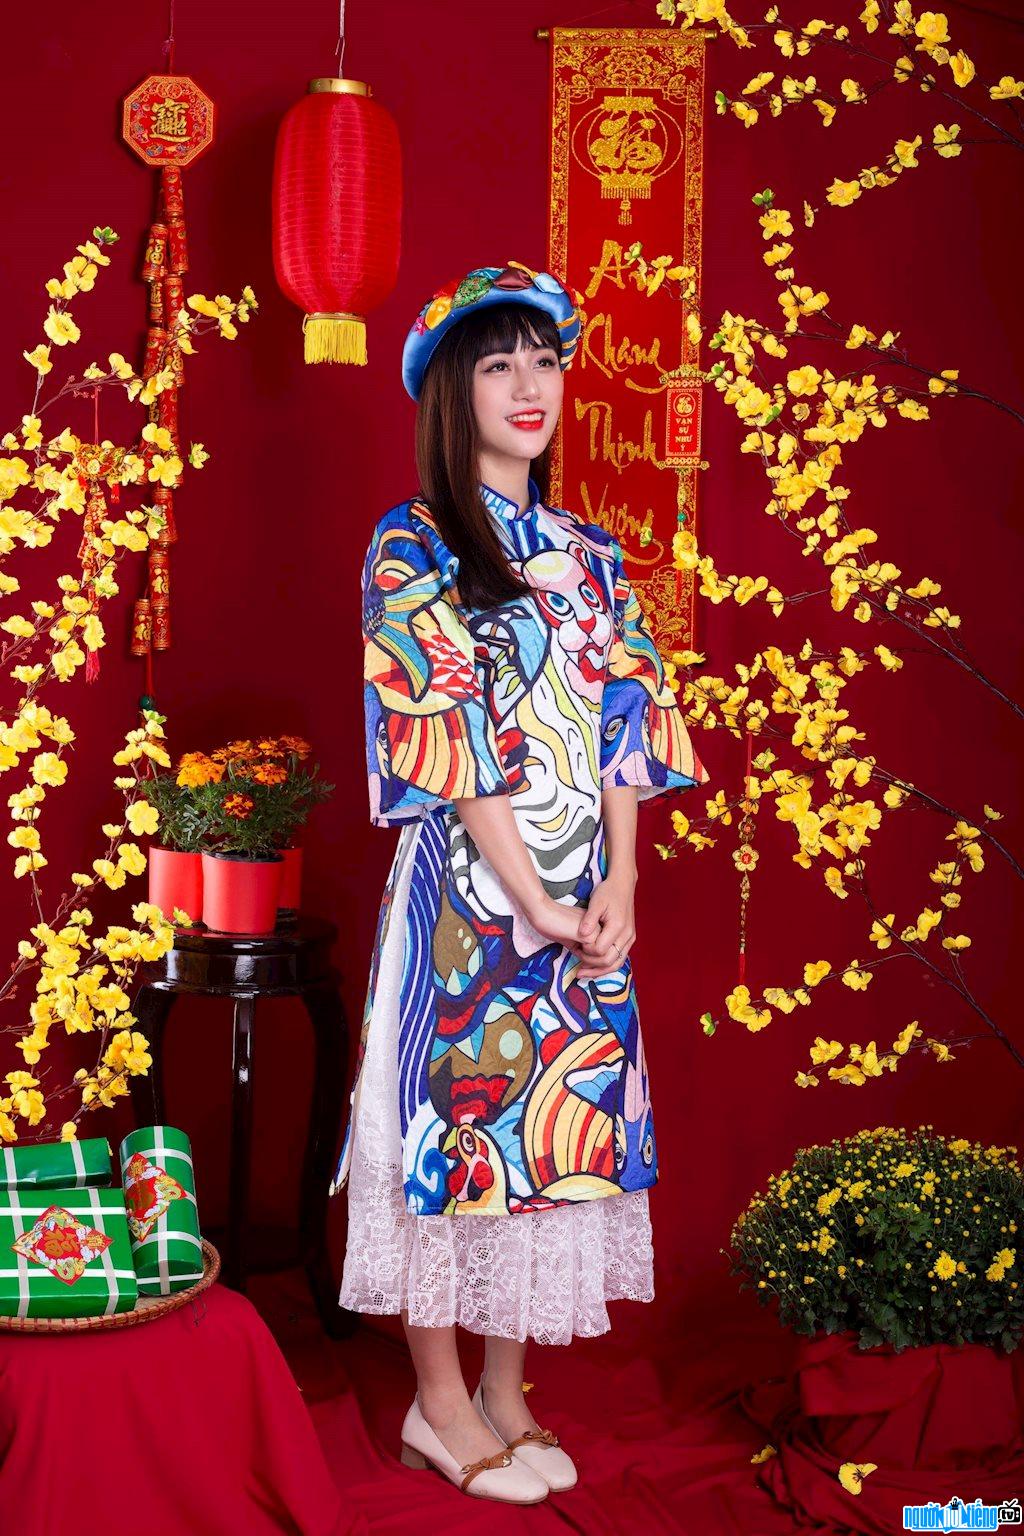  Hoai Linh is gentle in a traditional long dress during Tet